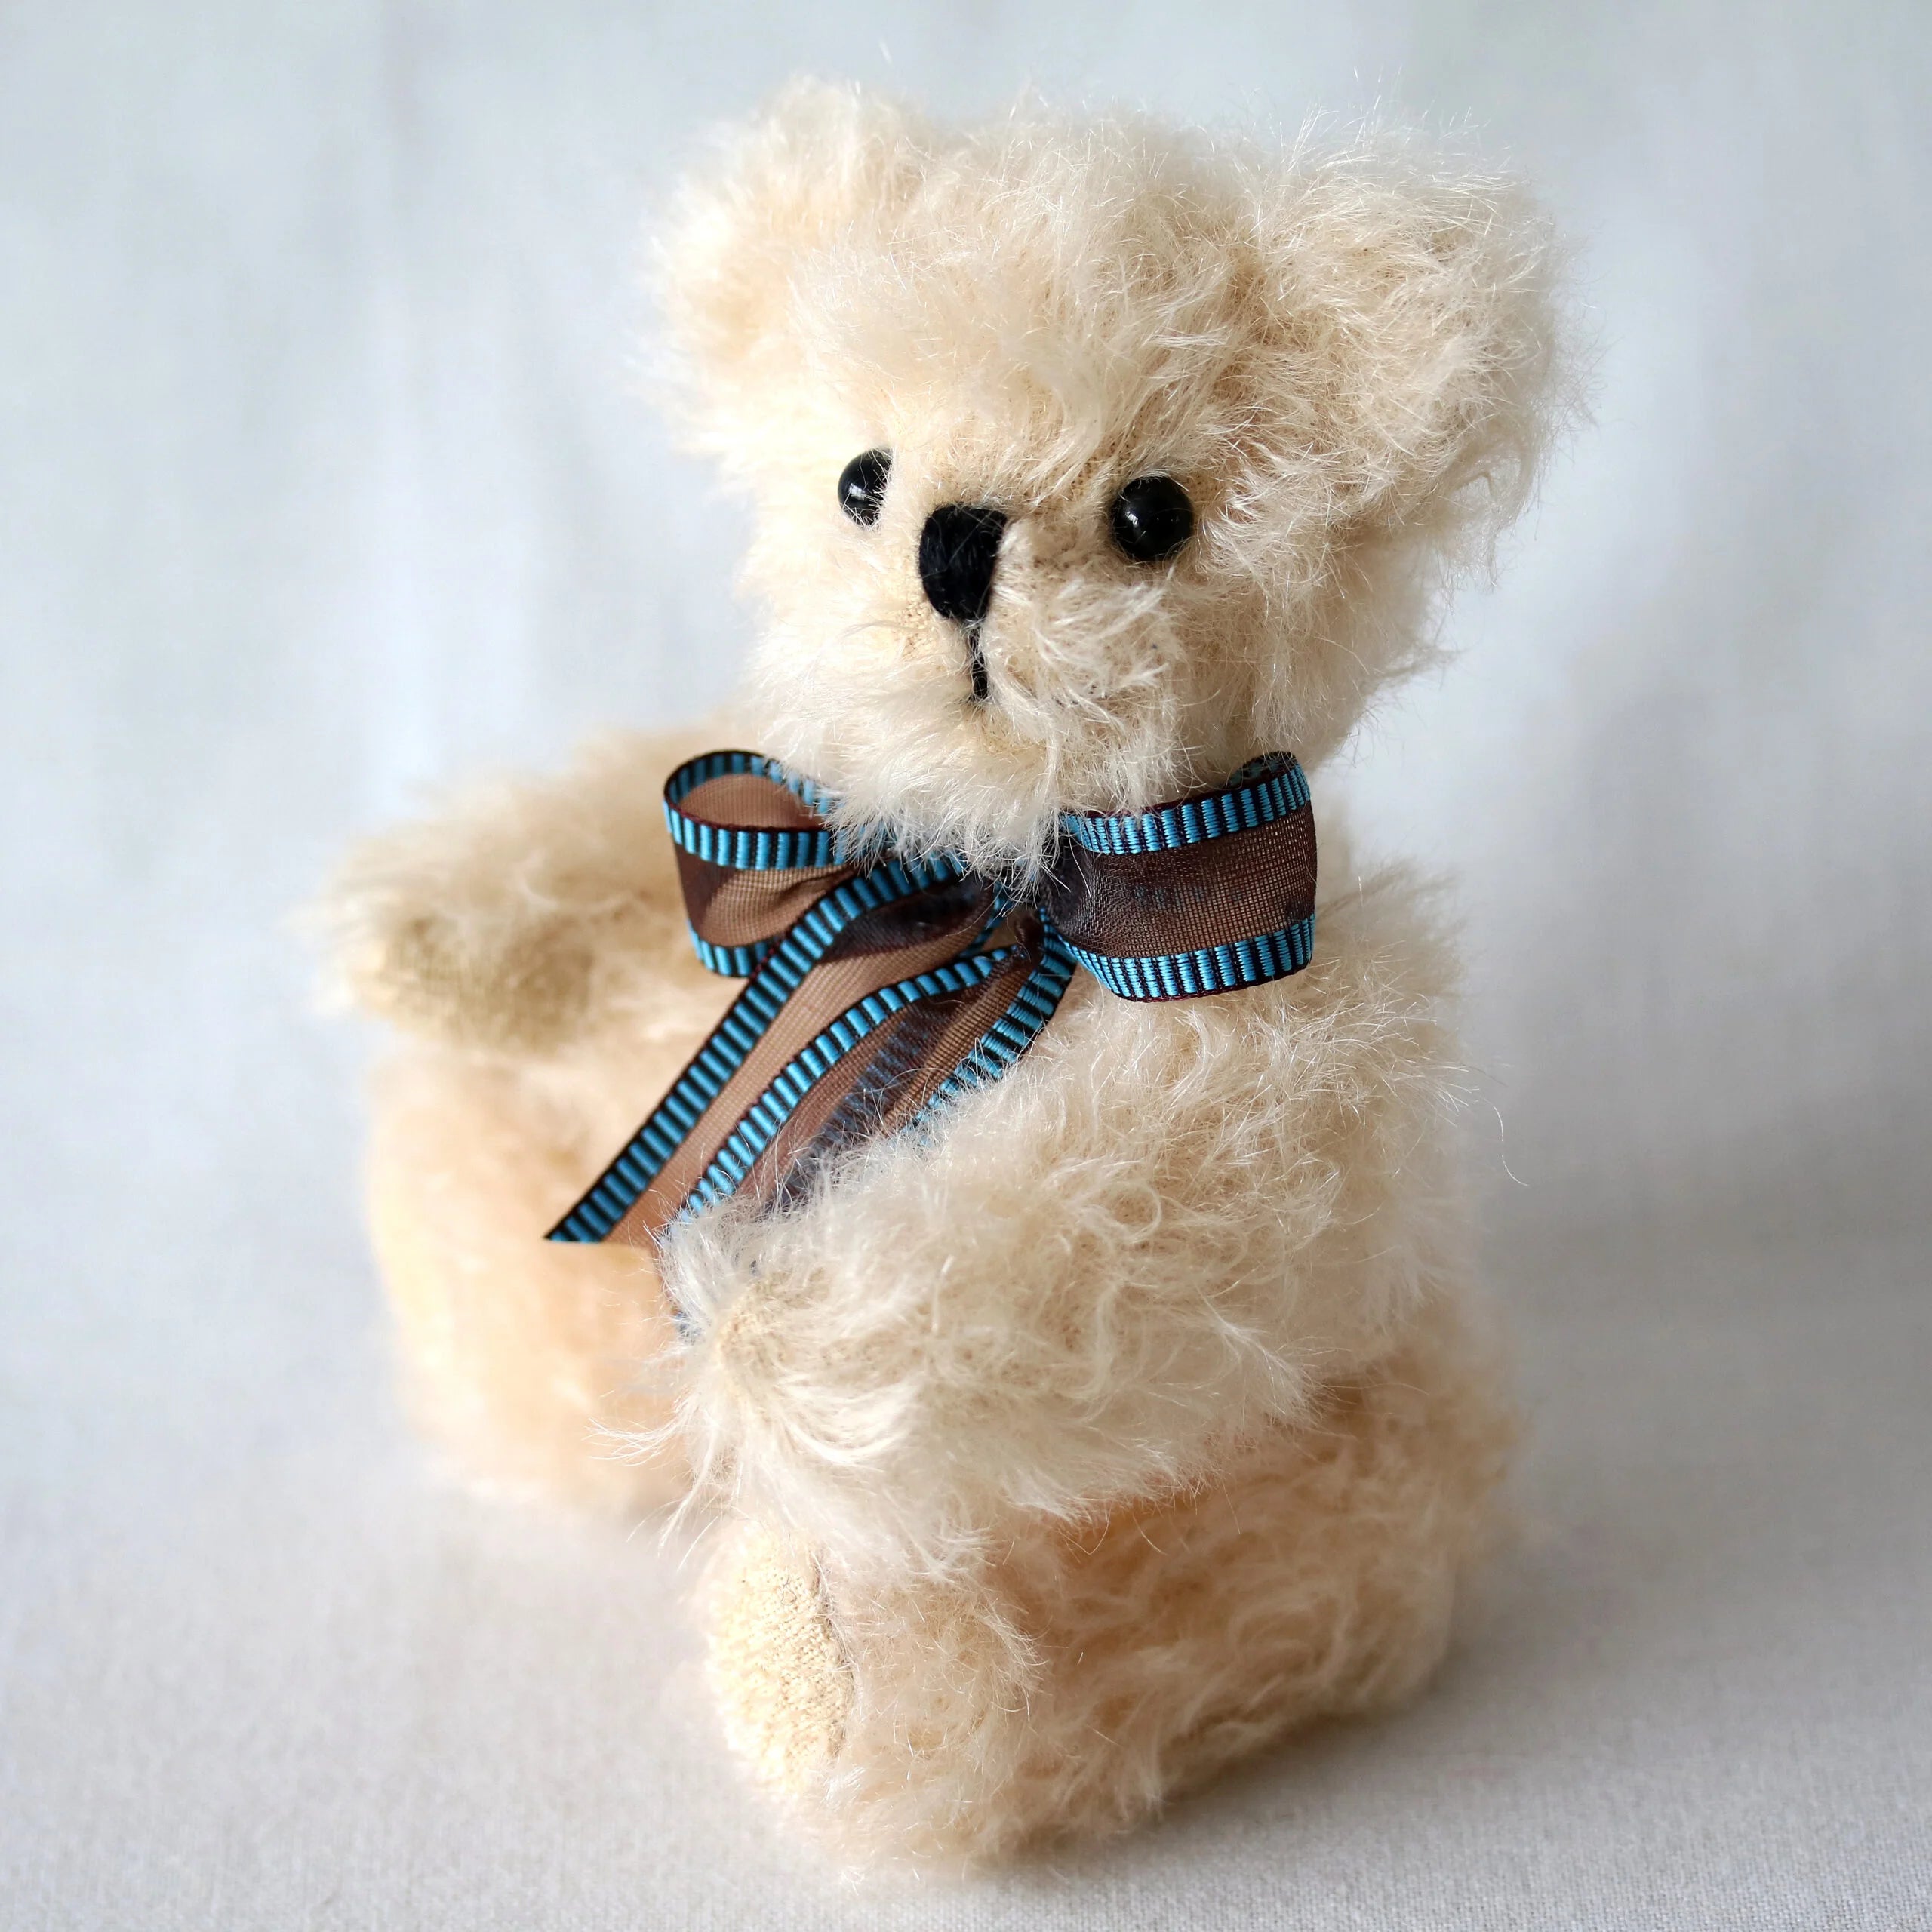 Fluffy Peter the Bear by Canterbury Bears